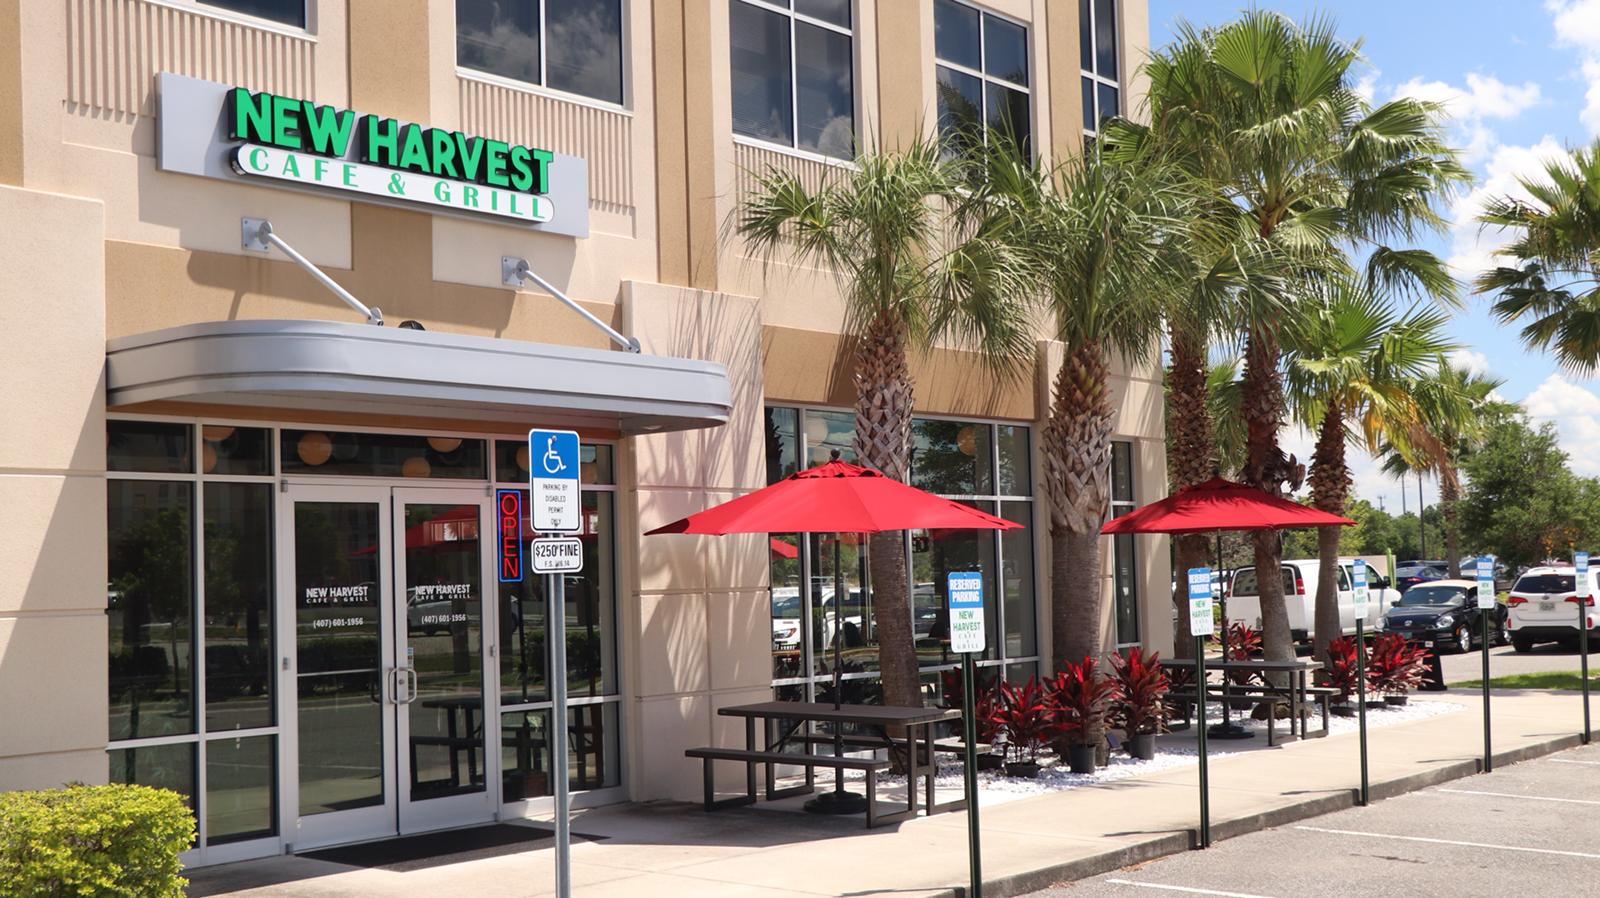 New Harvest Cafe & Grill